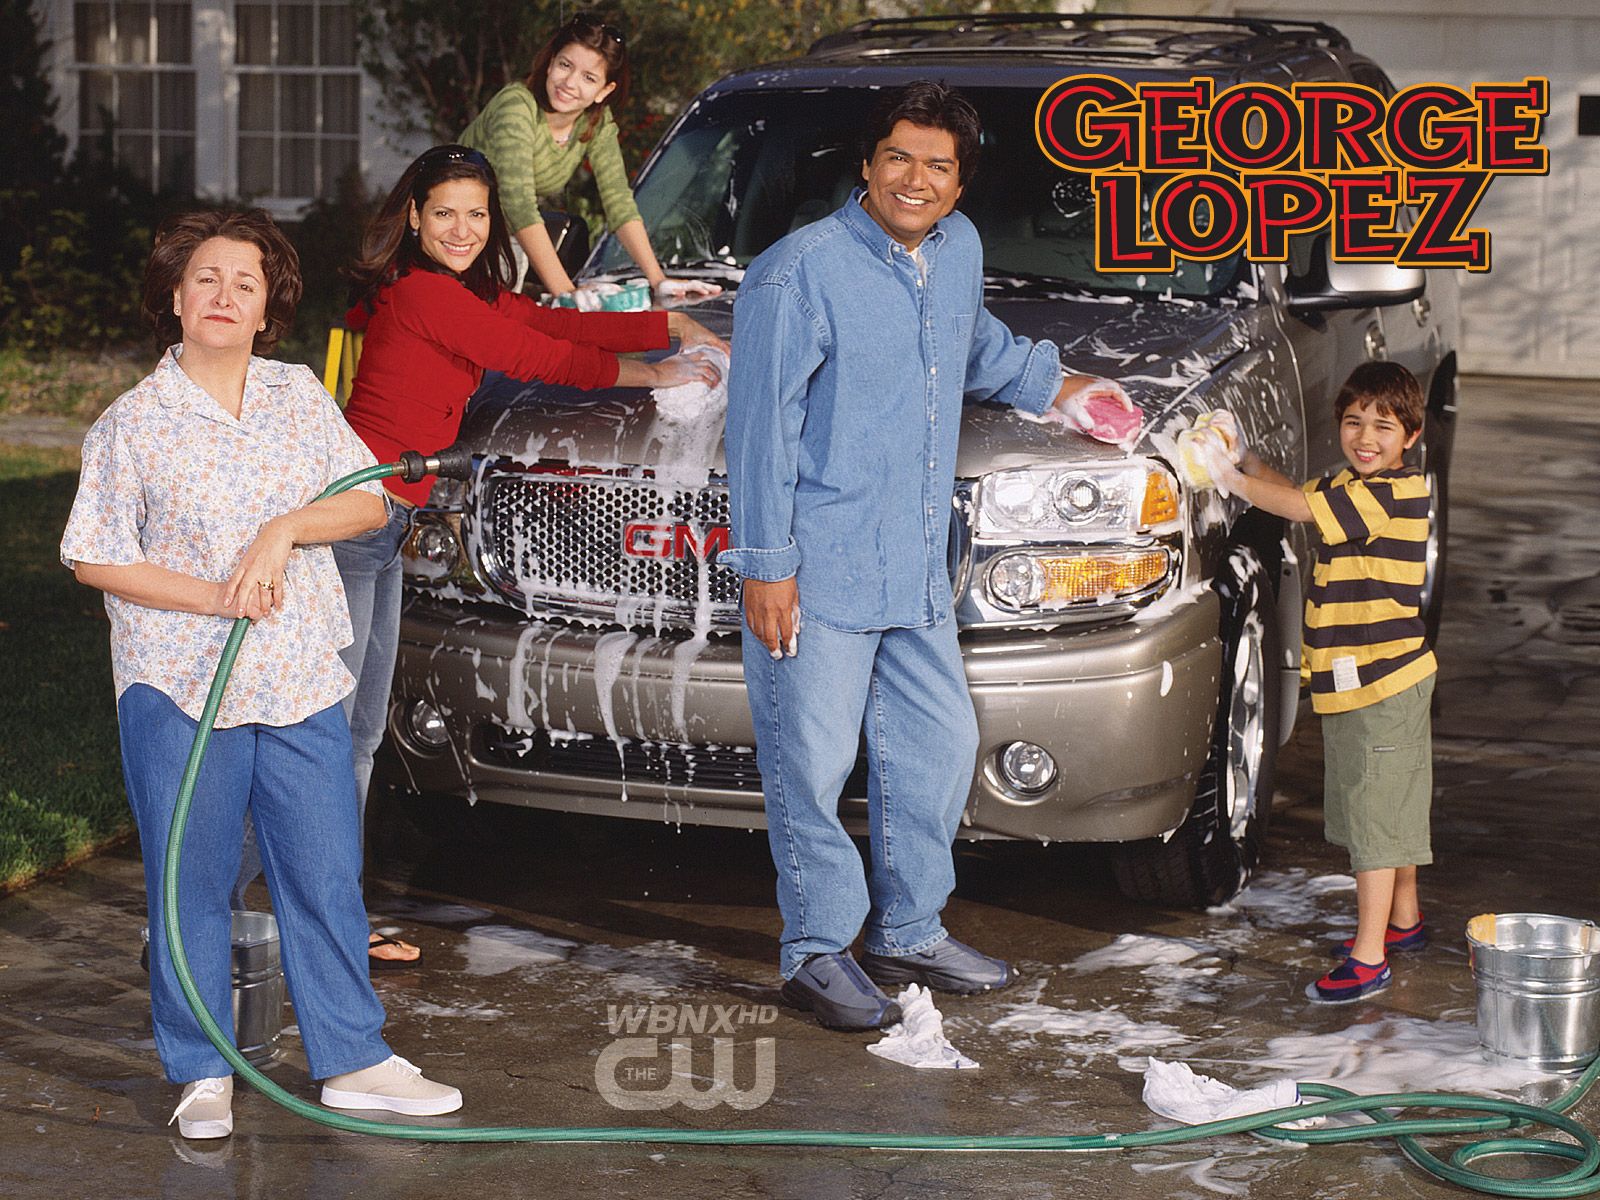 George Lopez Love This Show Funny As Hell 3favorite Tv